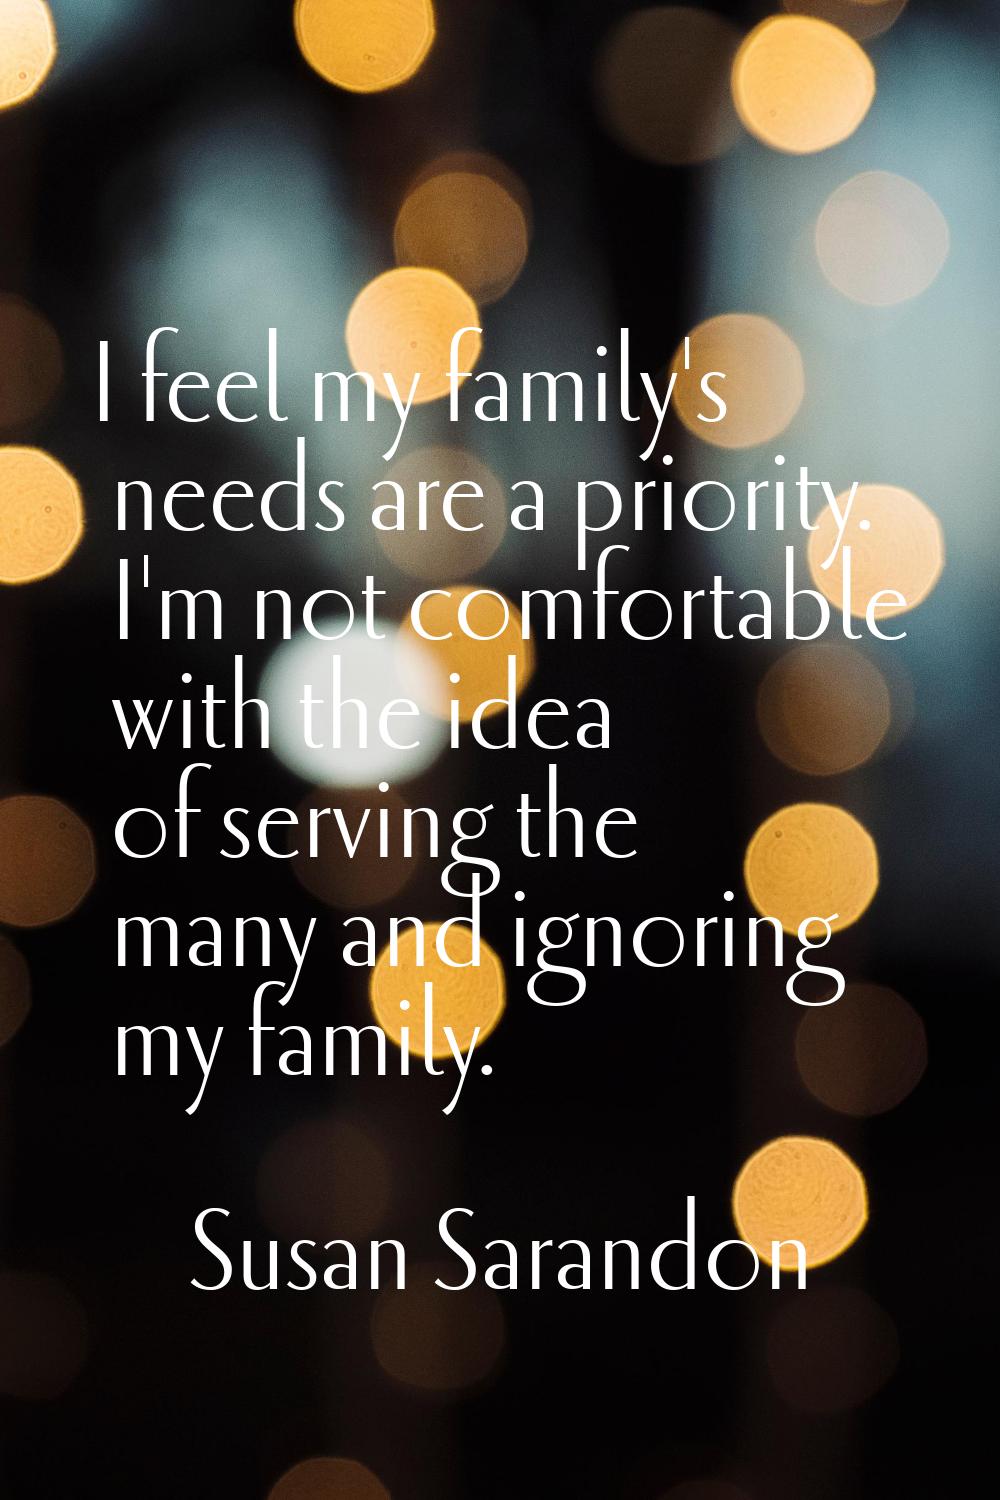 I feel my family's needs are a priority. I'm not comfortable with the idea of serving the many and 